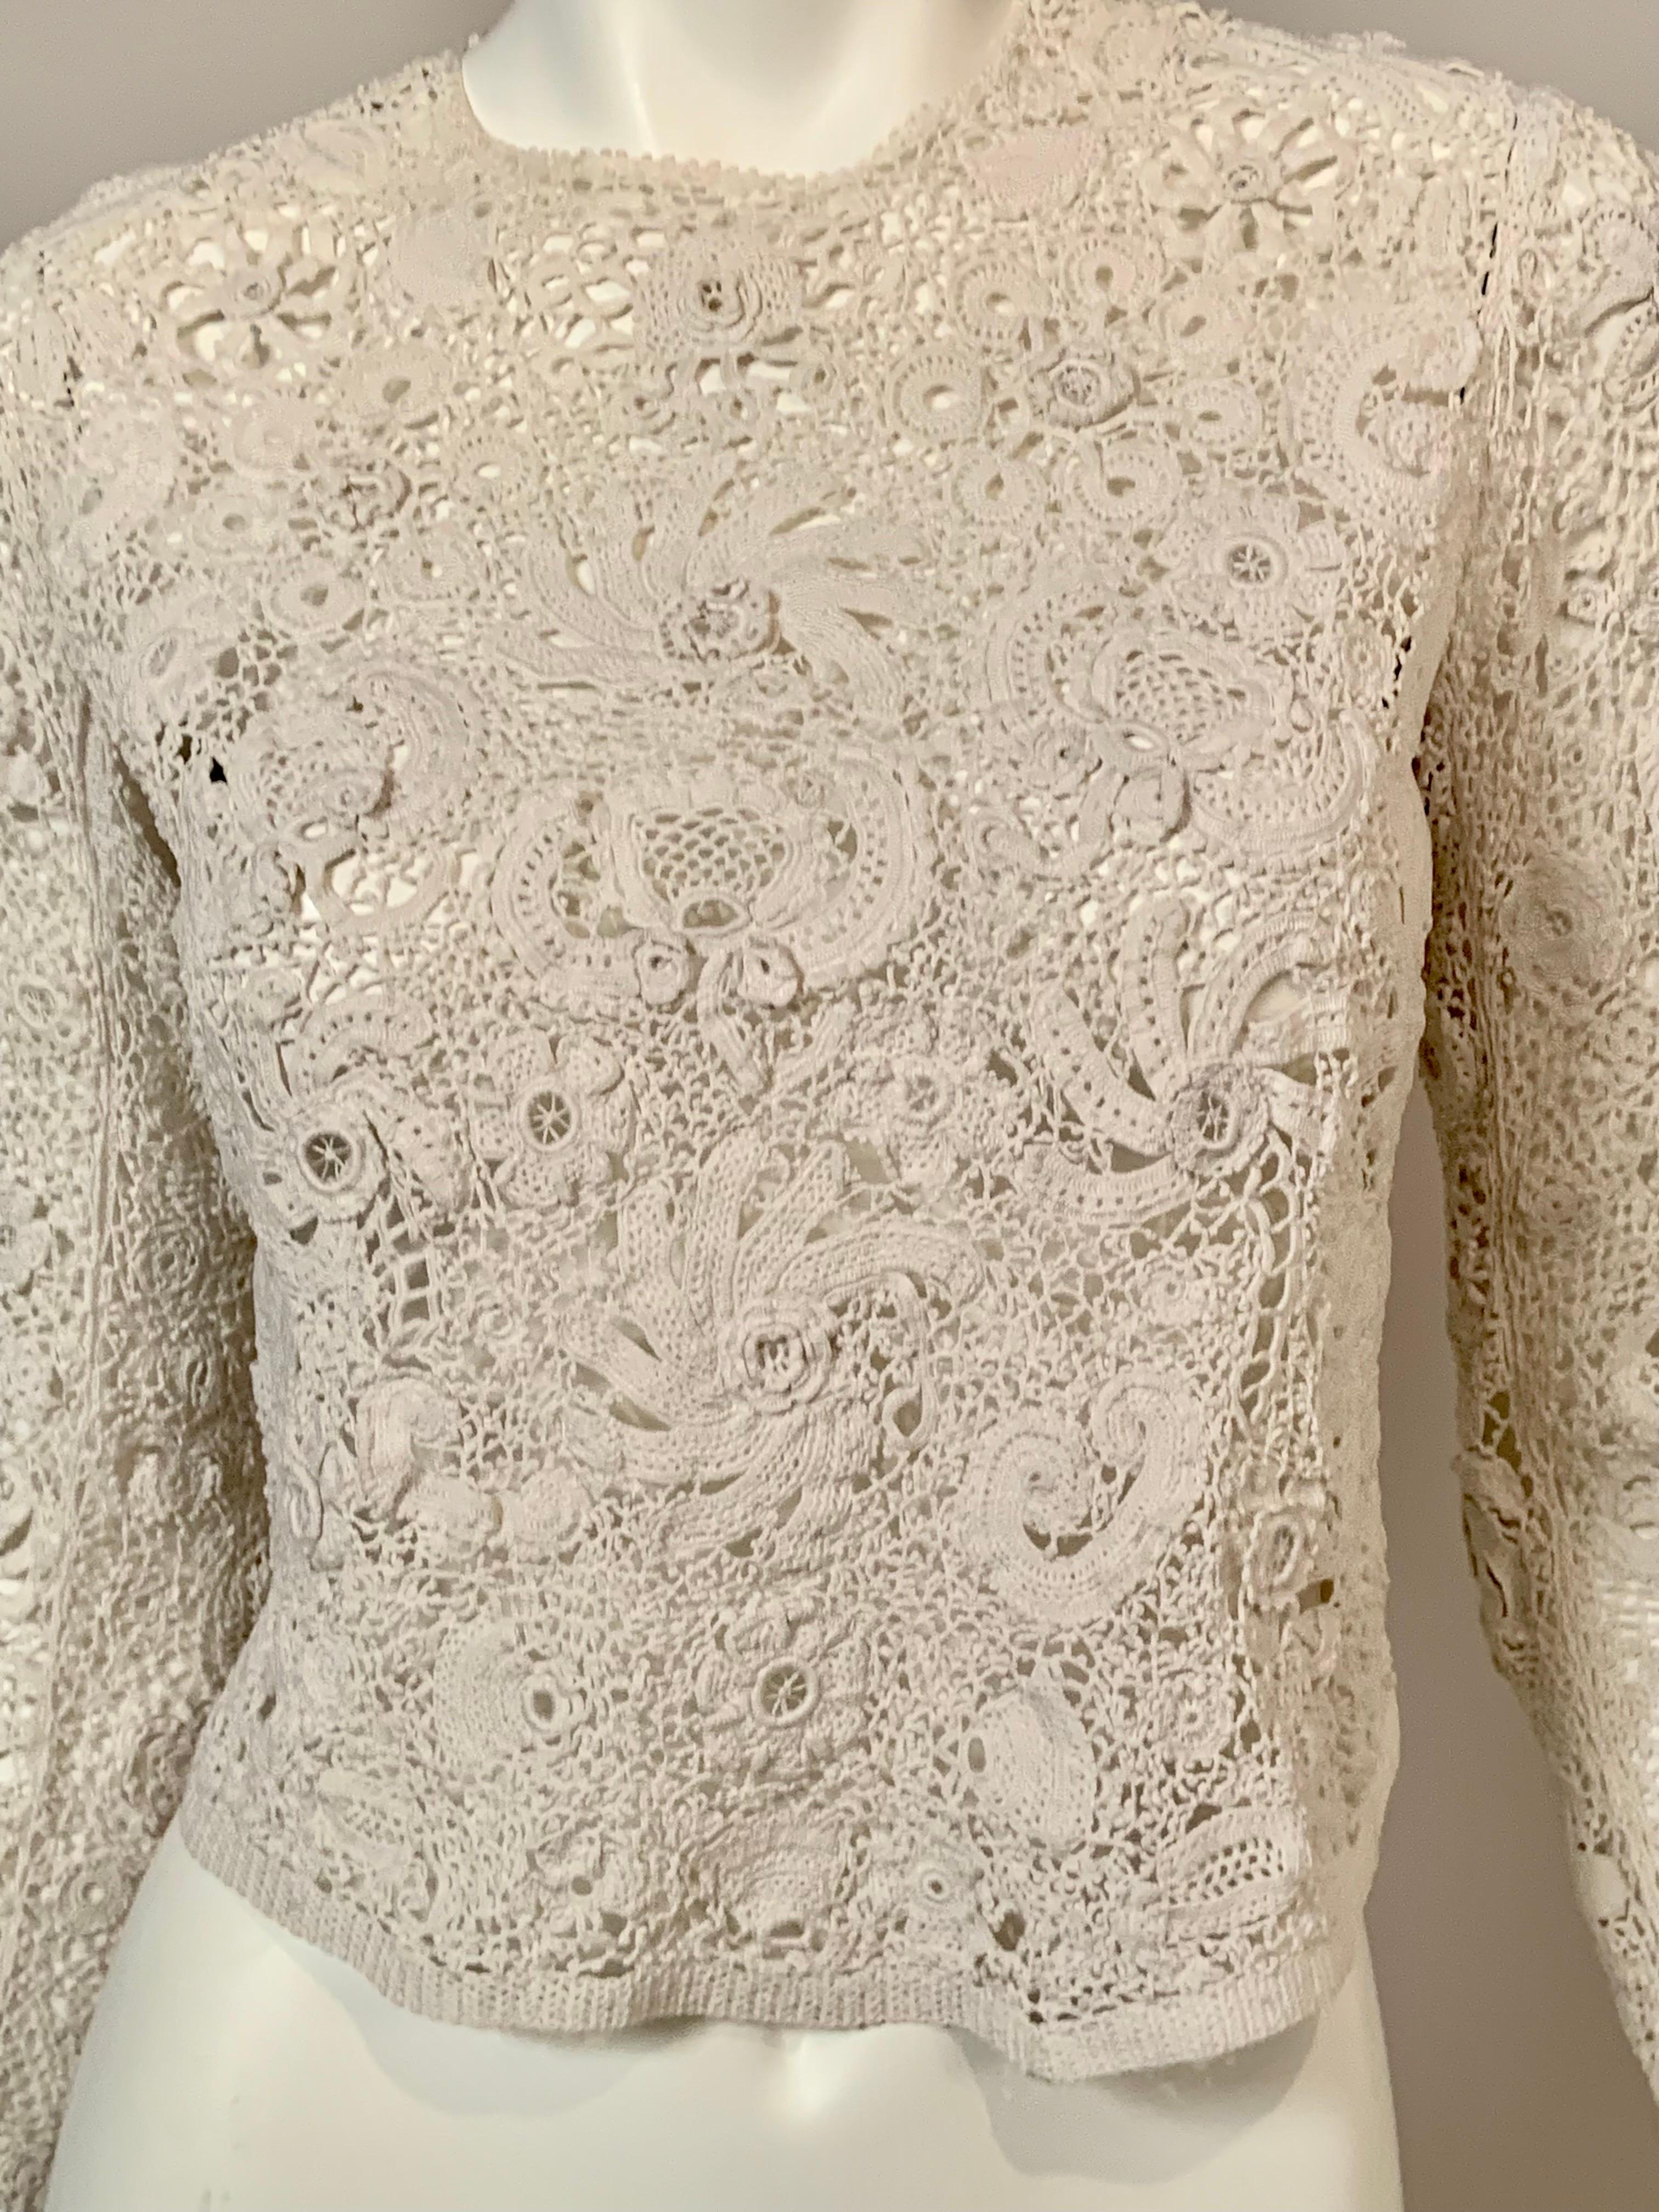 This beautiful handmade Irish lace or Irish crochet blouse is very well designed and thought out.  The blouse has a variety of floral and leaf motifs as well as a few shamrocks. These designs are either flat or three dimensional adding more interest